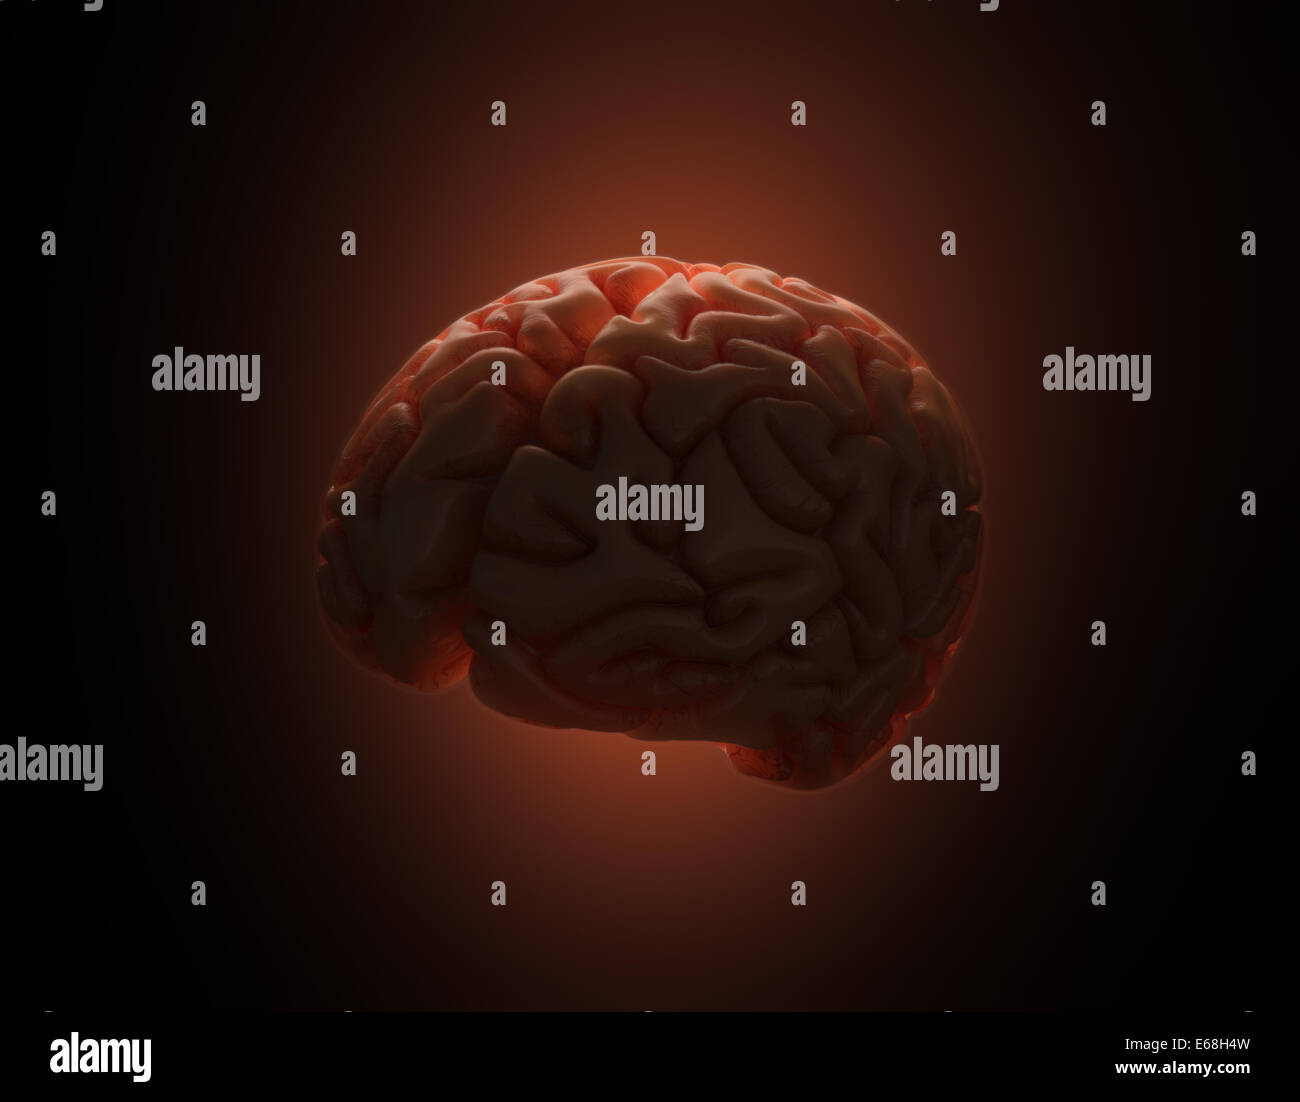 Brain being lit from behind in a dark environment. Clipping path included. Stock Photo